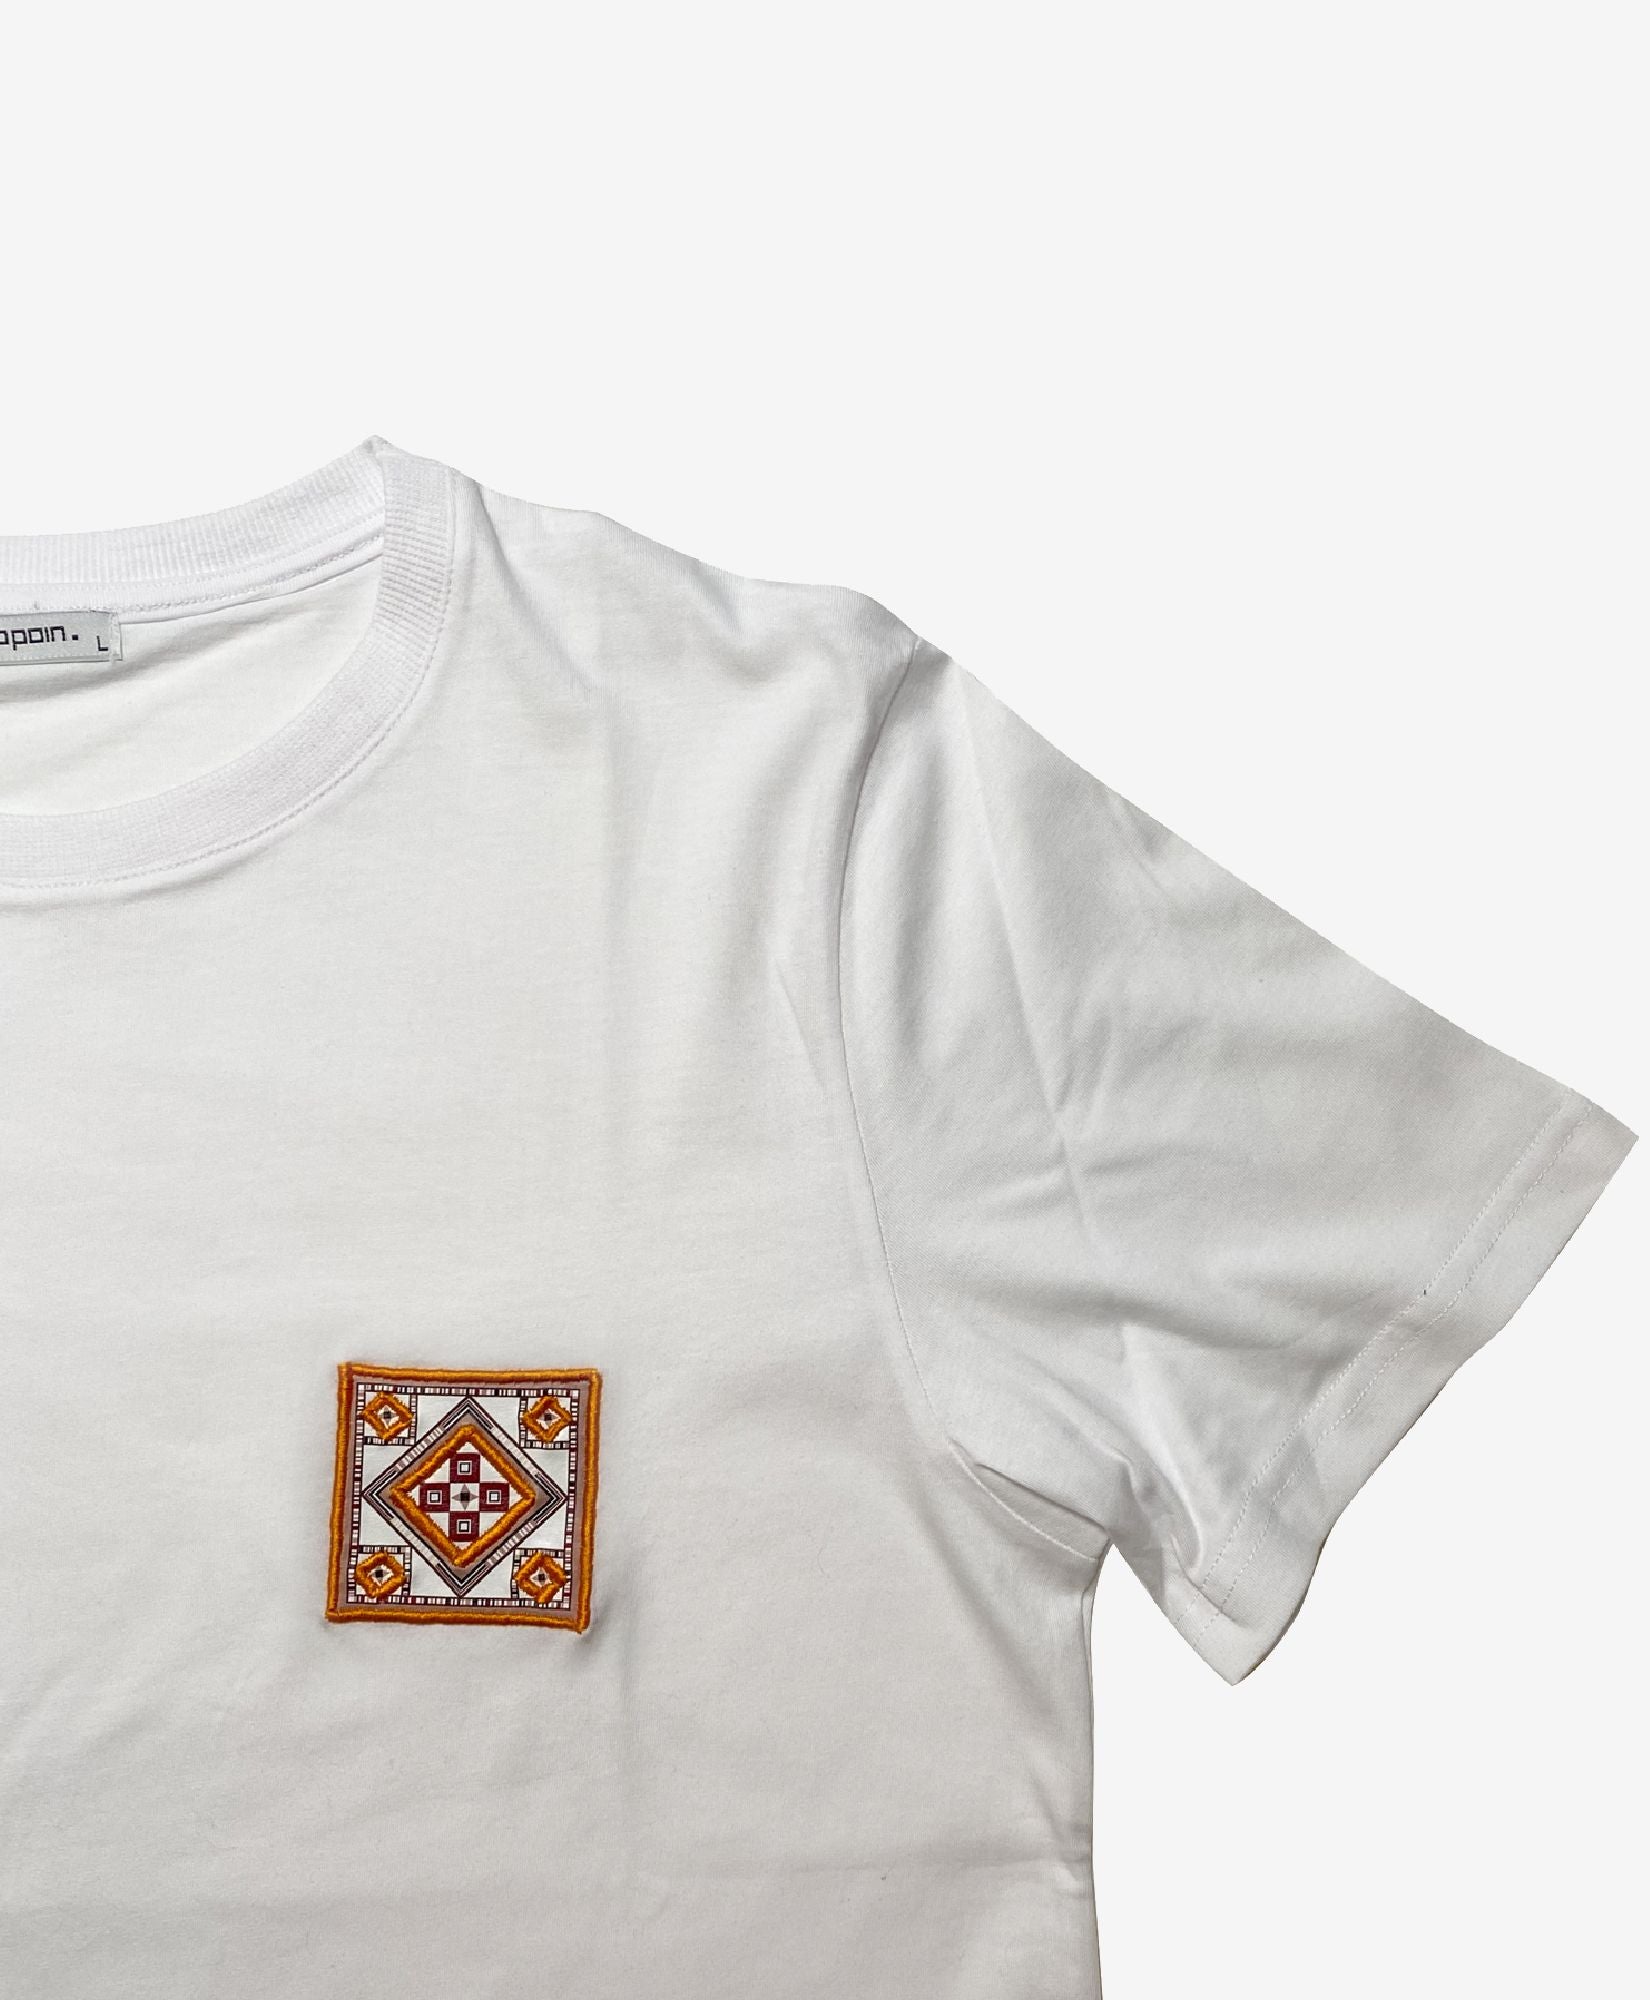  Embroidered Cotton White T-shirt / Stitched Islamic Geometry T-shirt